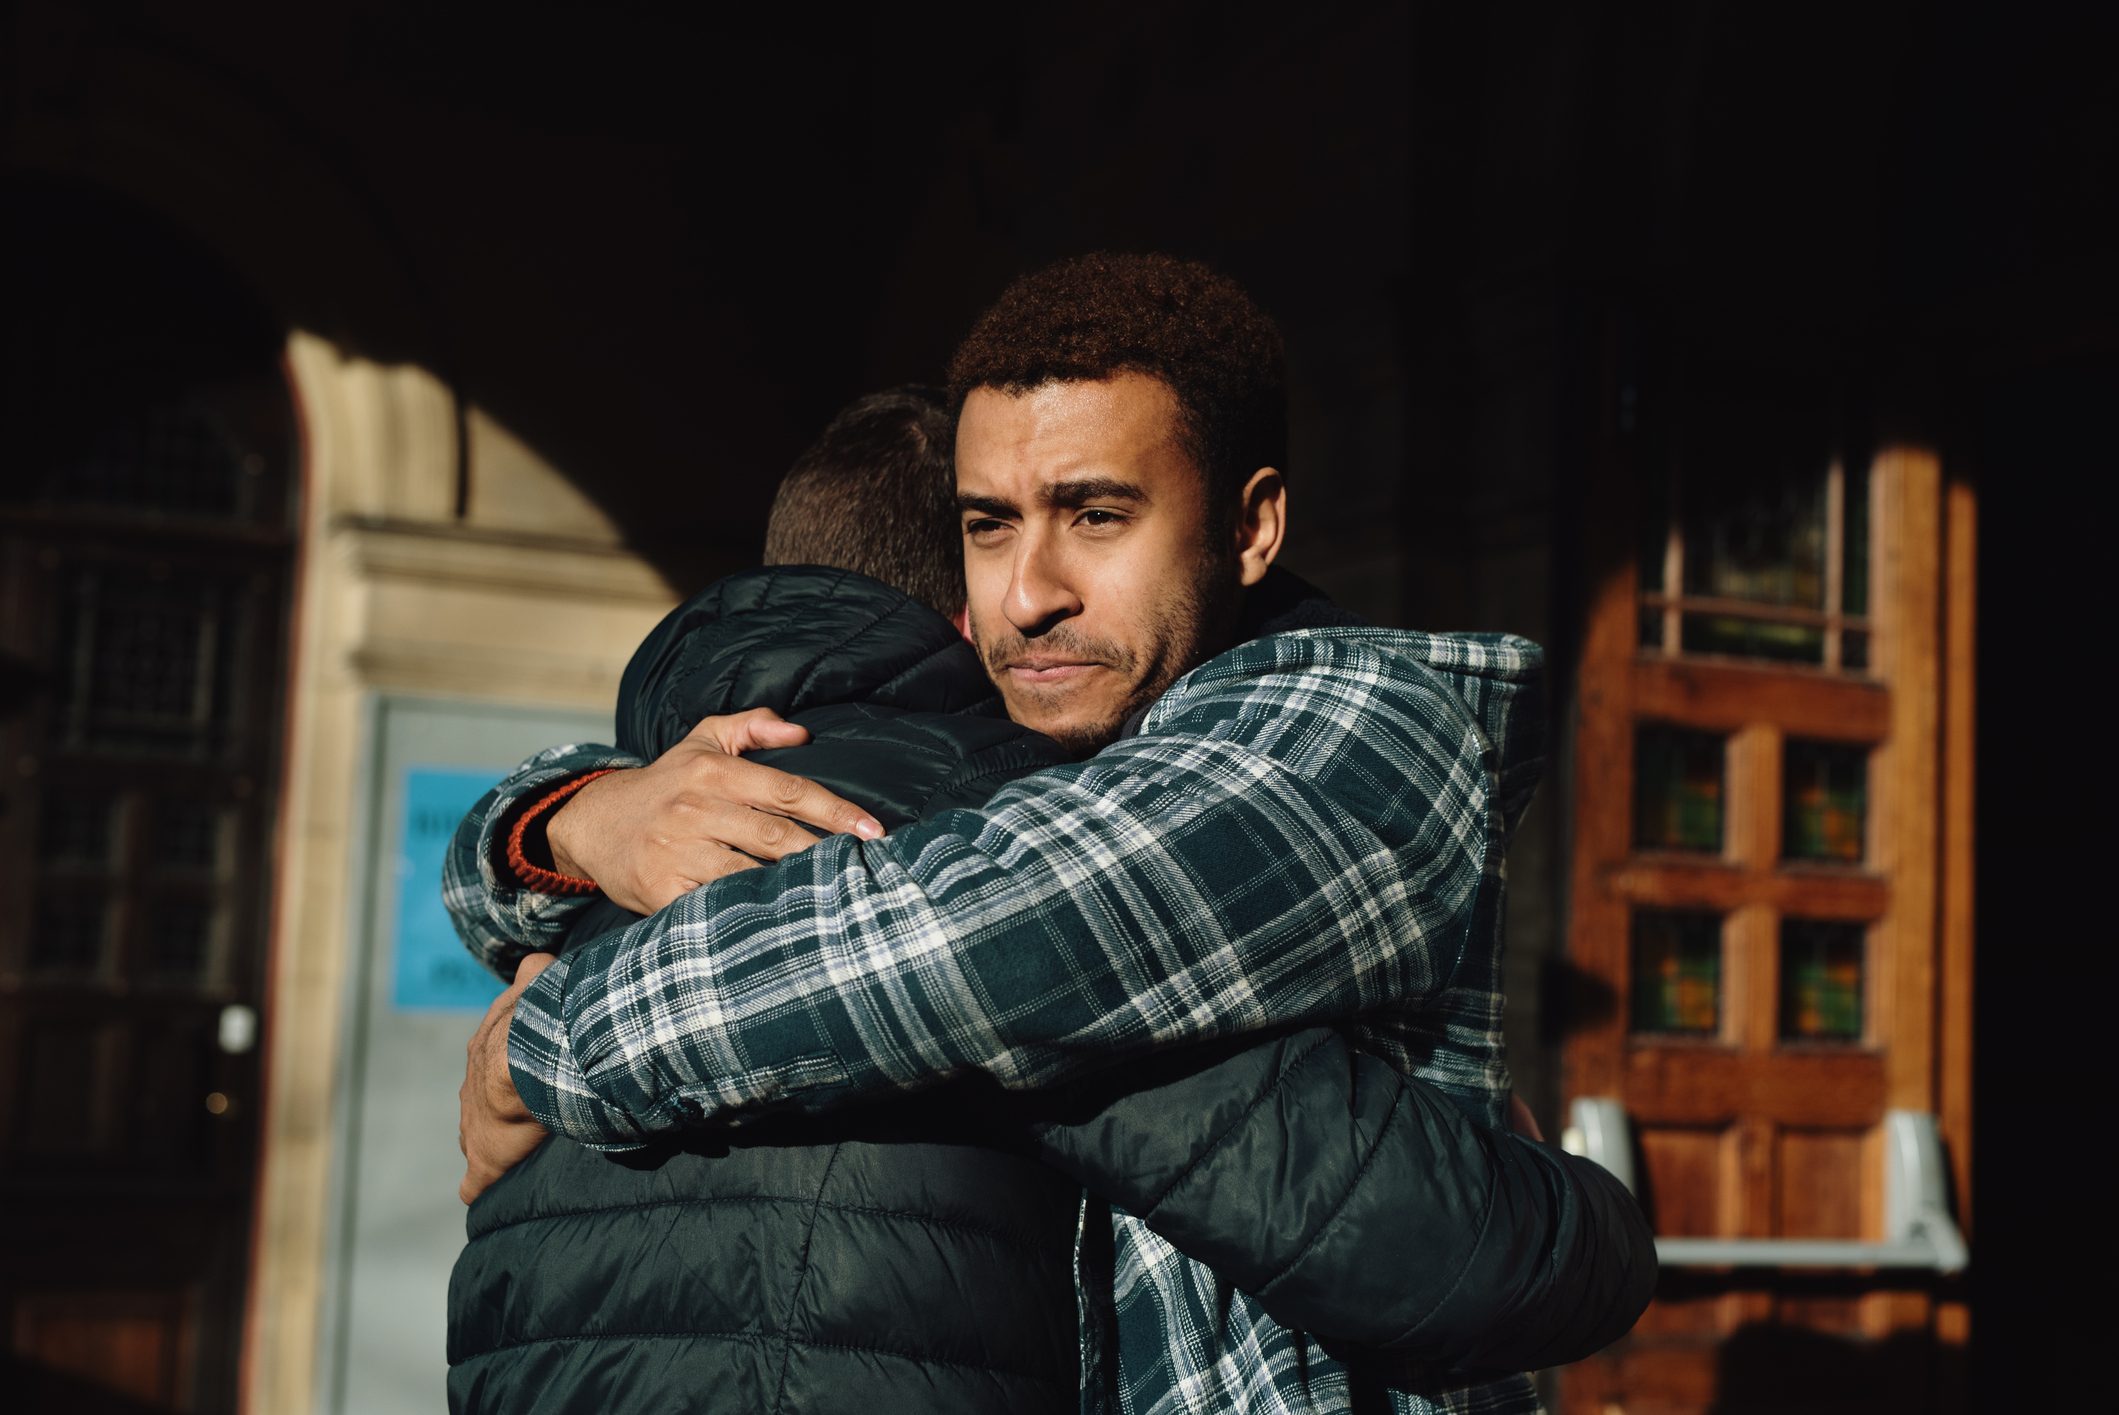 Two men hug outside of a building